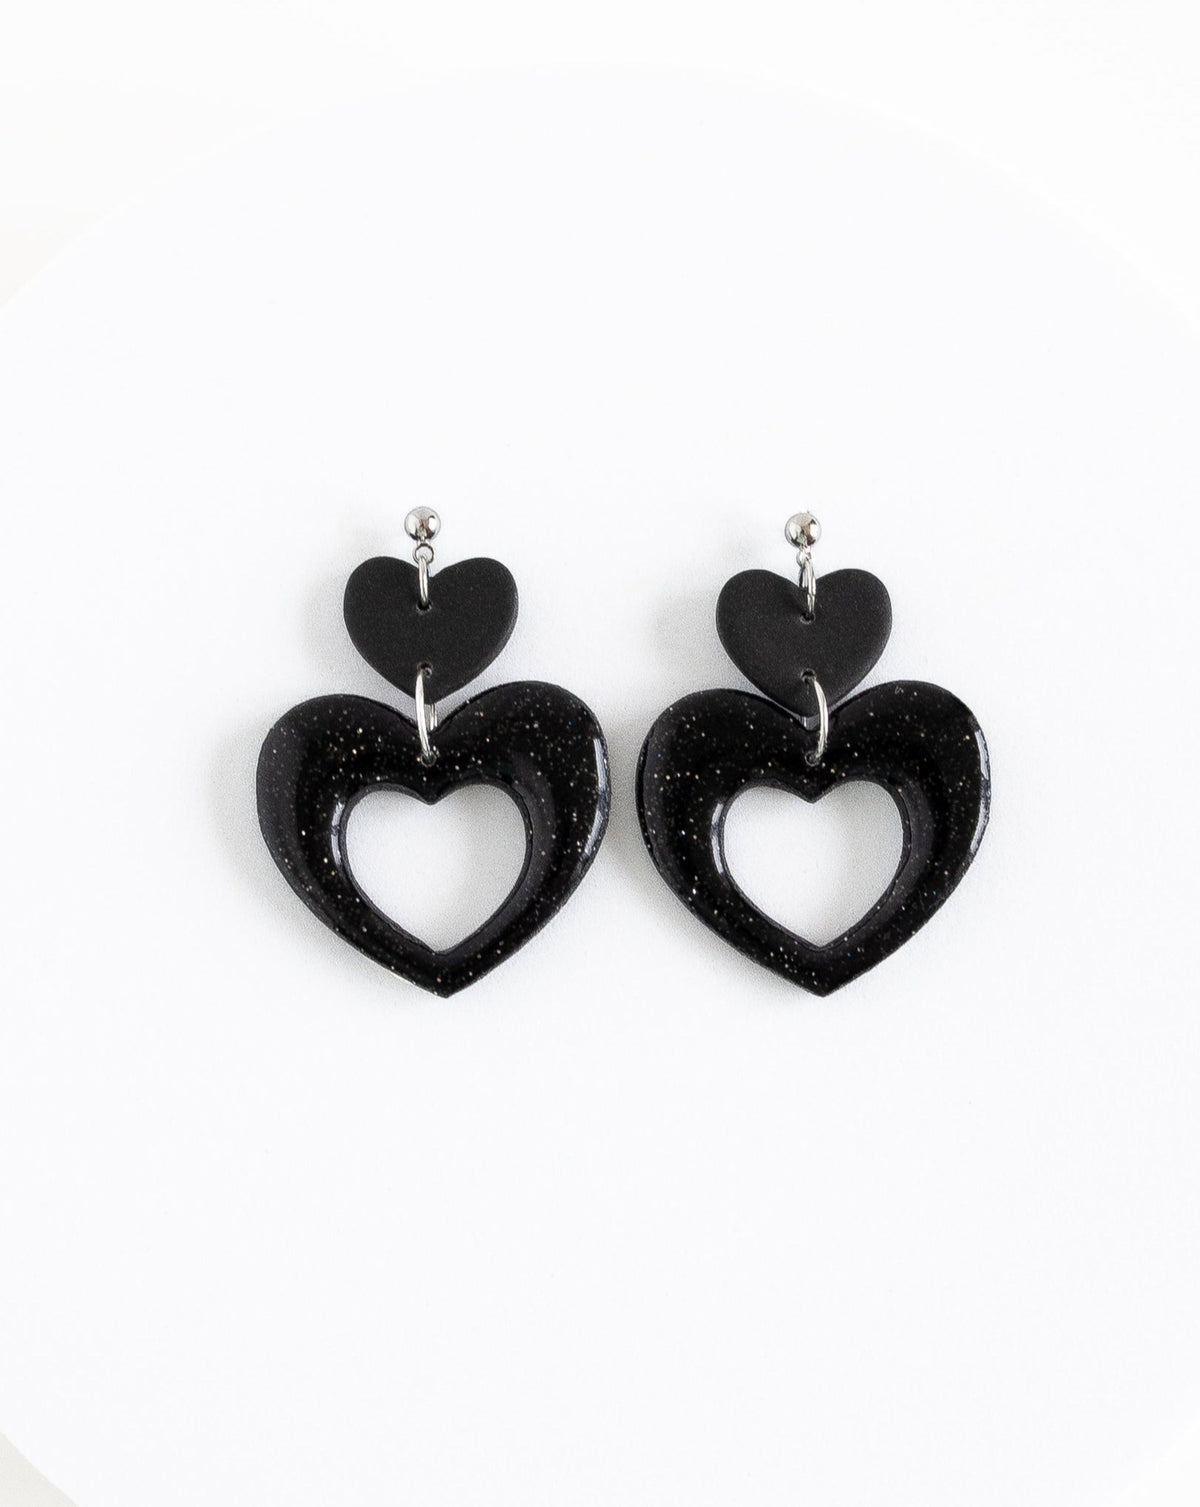 Close-up of my valentine earrings in color black with silver ball studs.